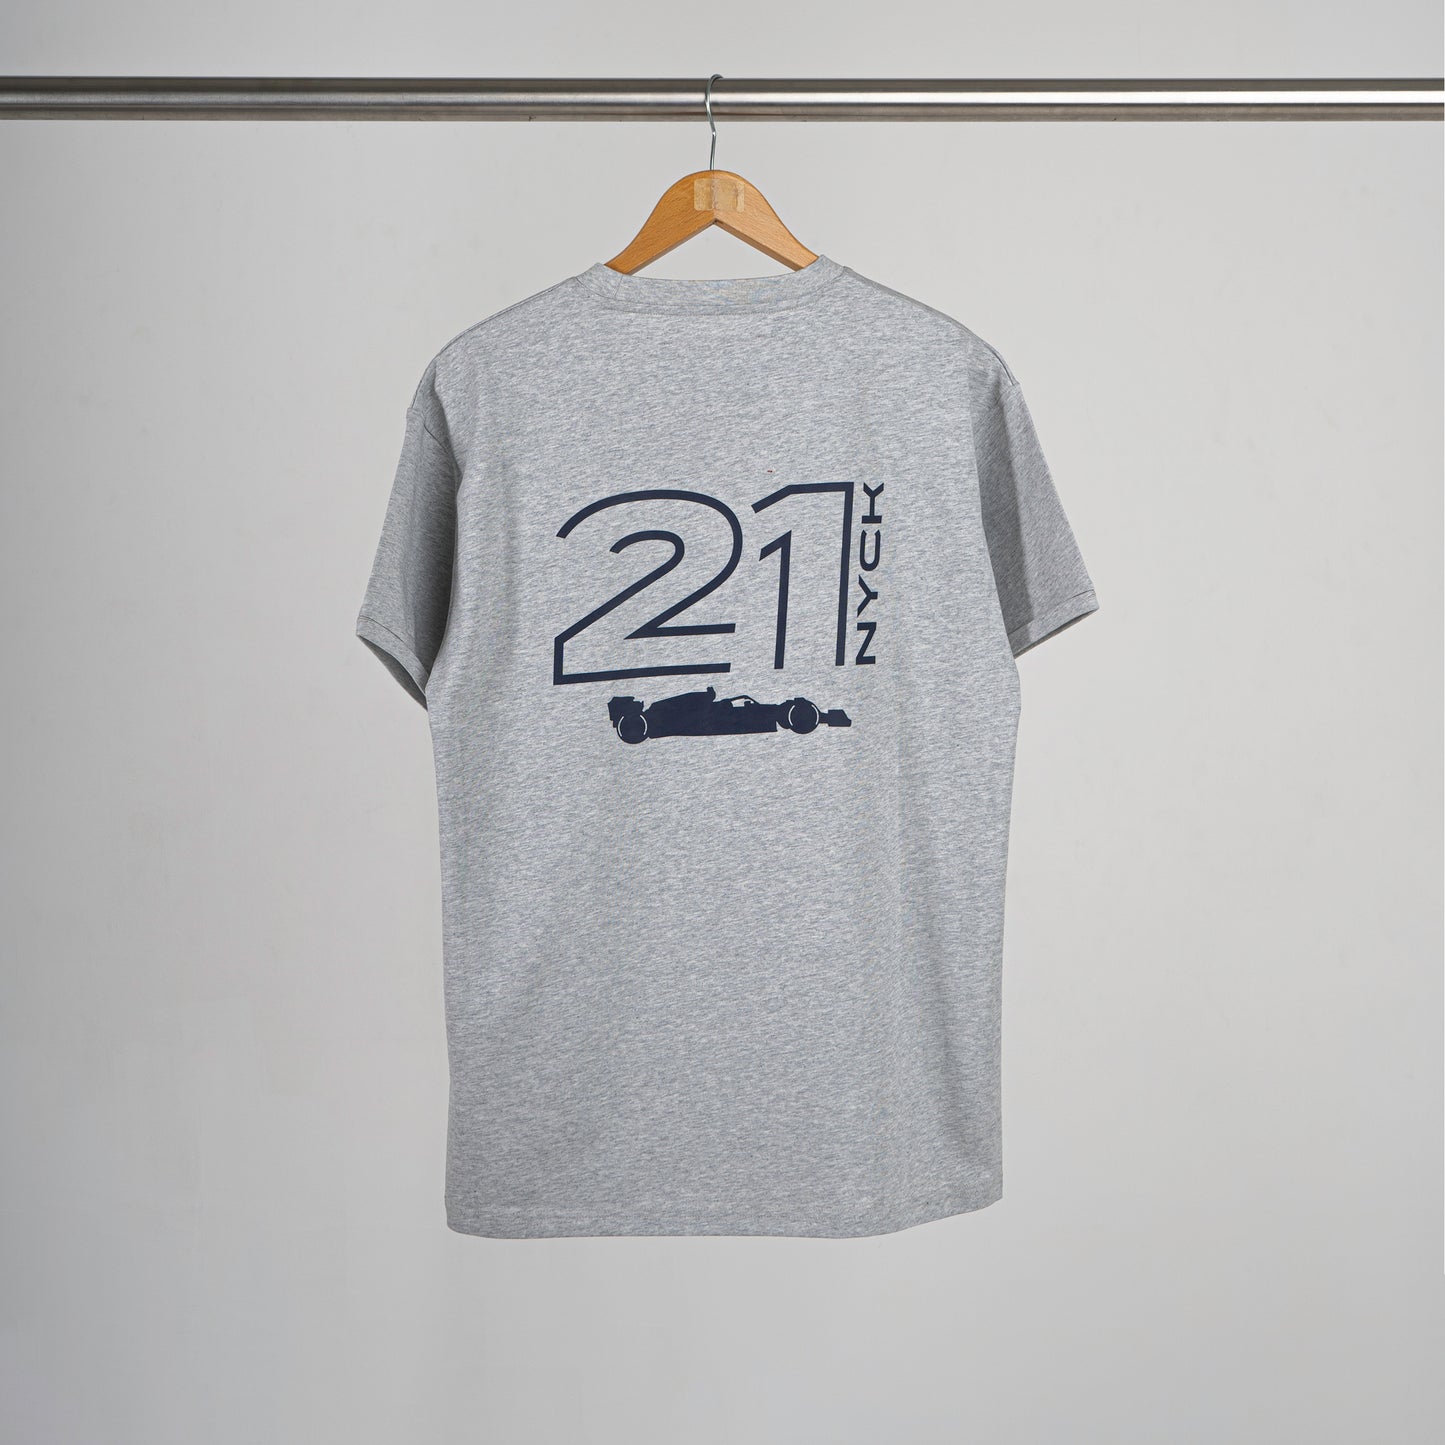 The official NYCK 21 t-shirt